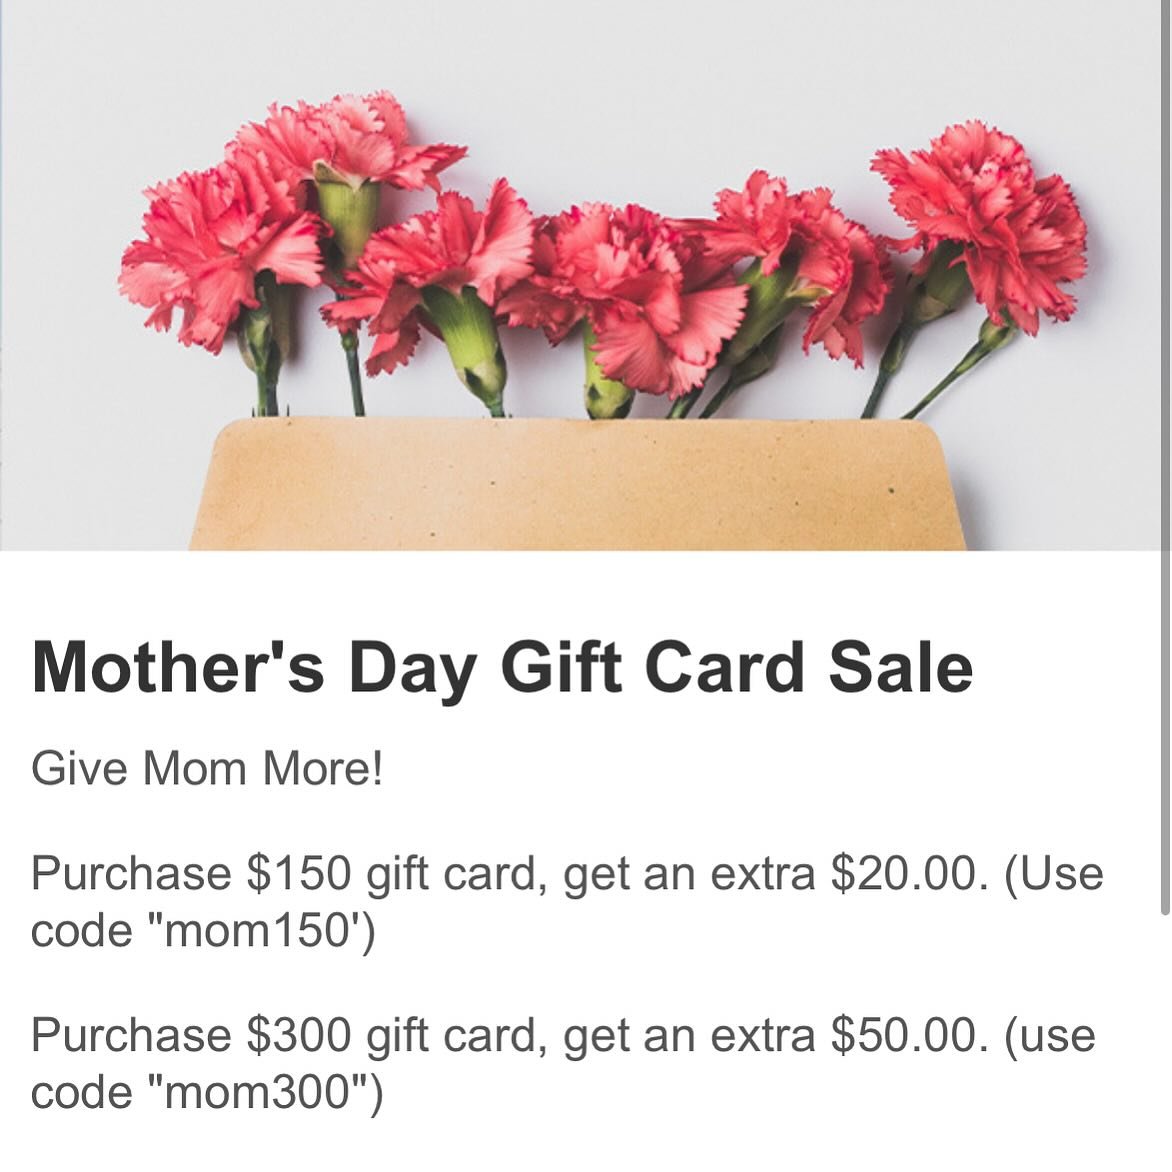 Last minute gift idea&hellip;. 

Give mom the gift of relaxation and self care.  We will handle the rest! 

Link in bio 

#mothersdaygift #spagift #giftcardsale #momsofinstagram #oaklandmoms #oaklandspa #massage #facial #haircut #luxuryhaircare #suga